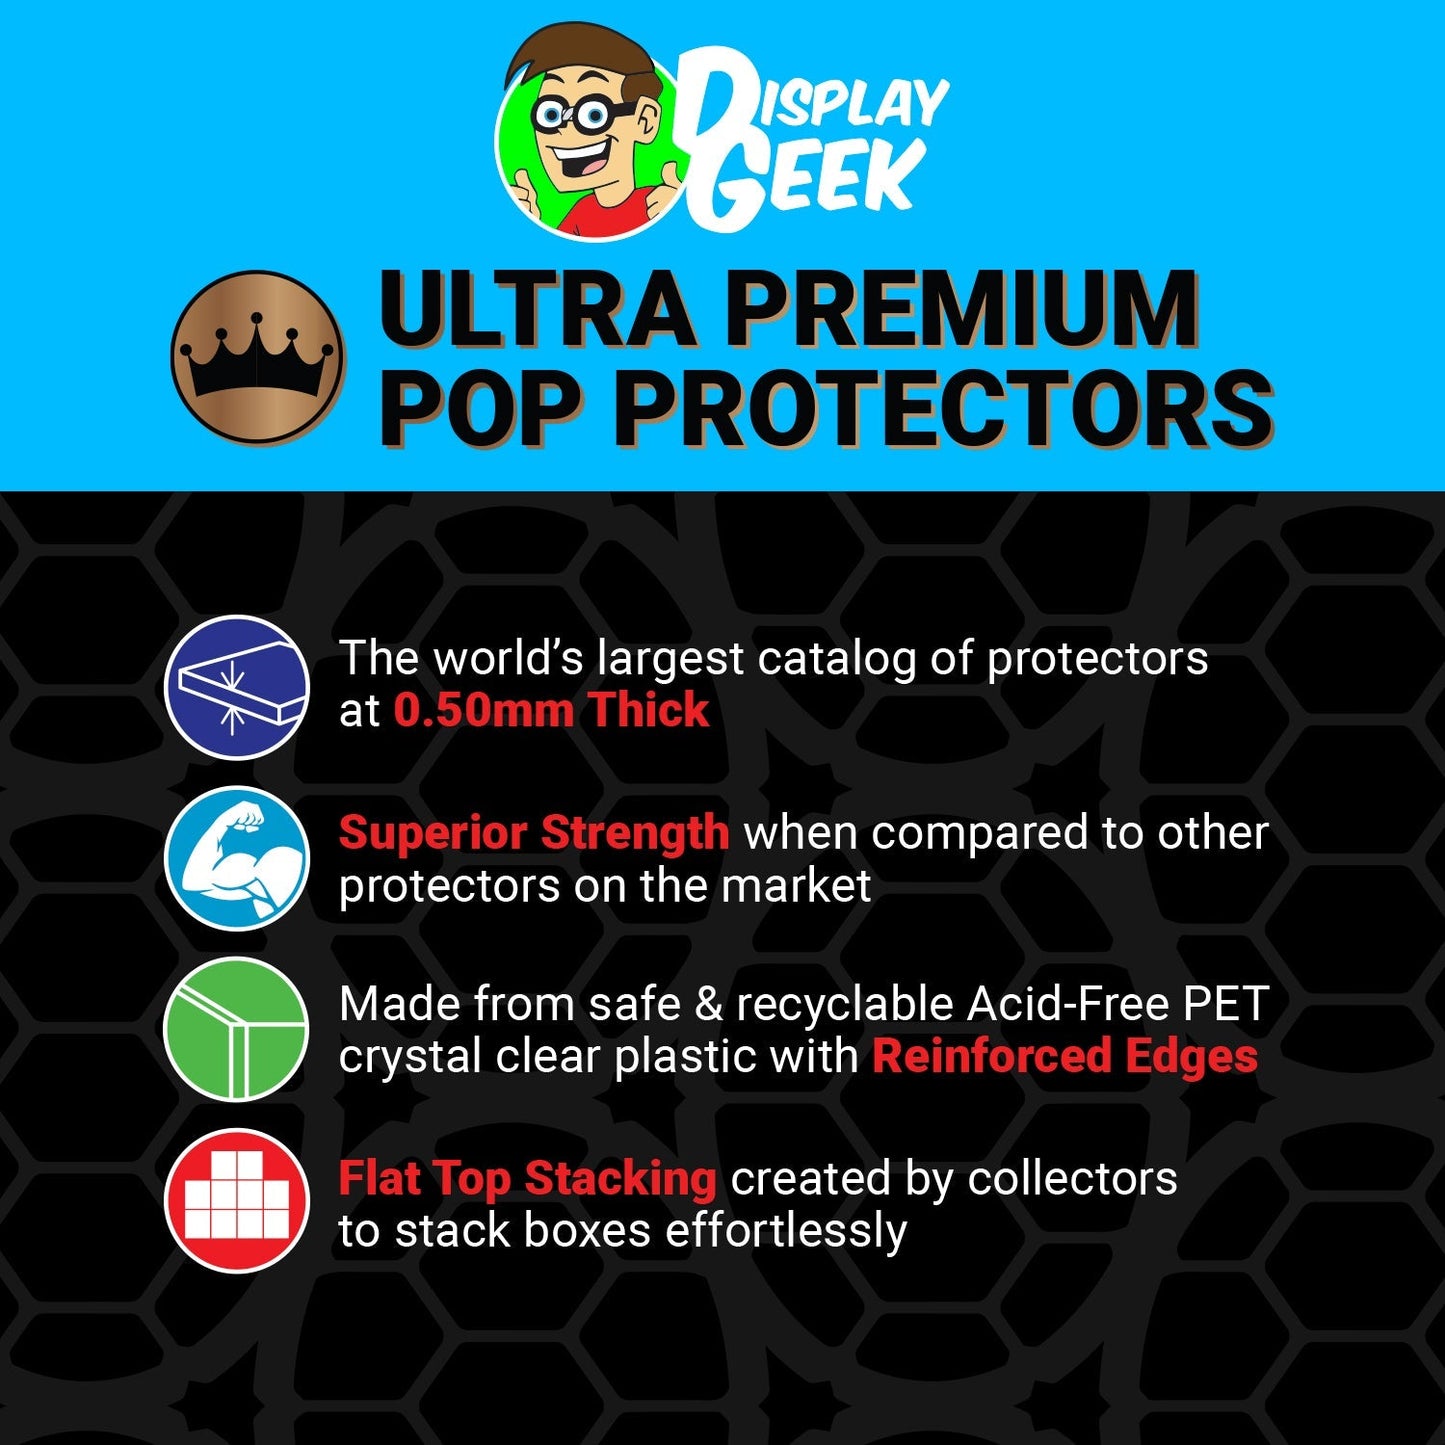 Pop Protector for Freddy Funko Blacklight Green Face SDCC LE 100 - PPG Pop Protector Guide Search Created by Display Geek